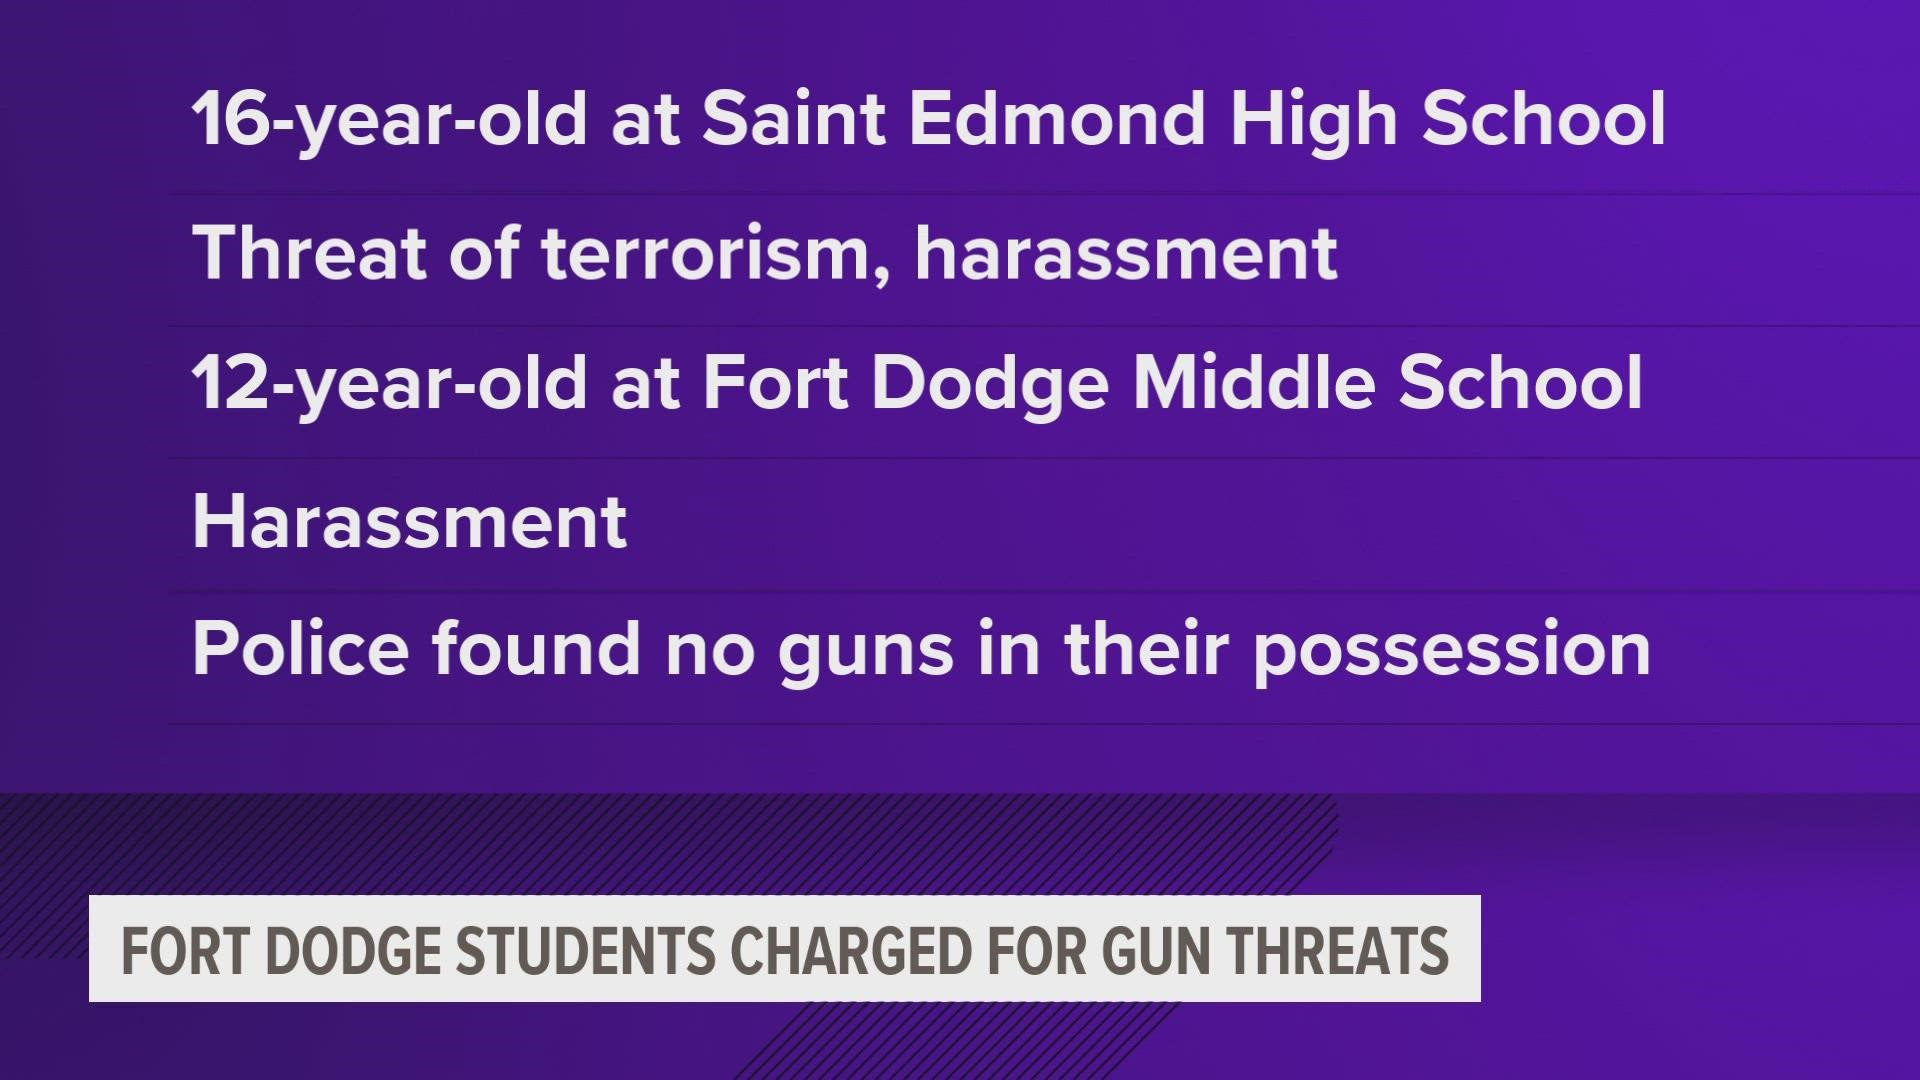 Police investigated and found that neither student actually had a gun in their possession. As far as we know, these incidents are not related.